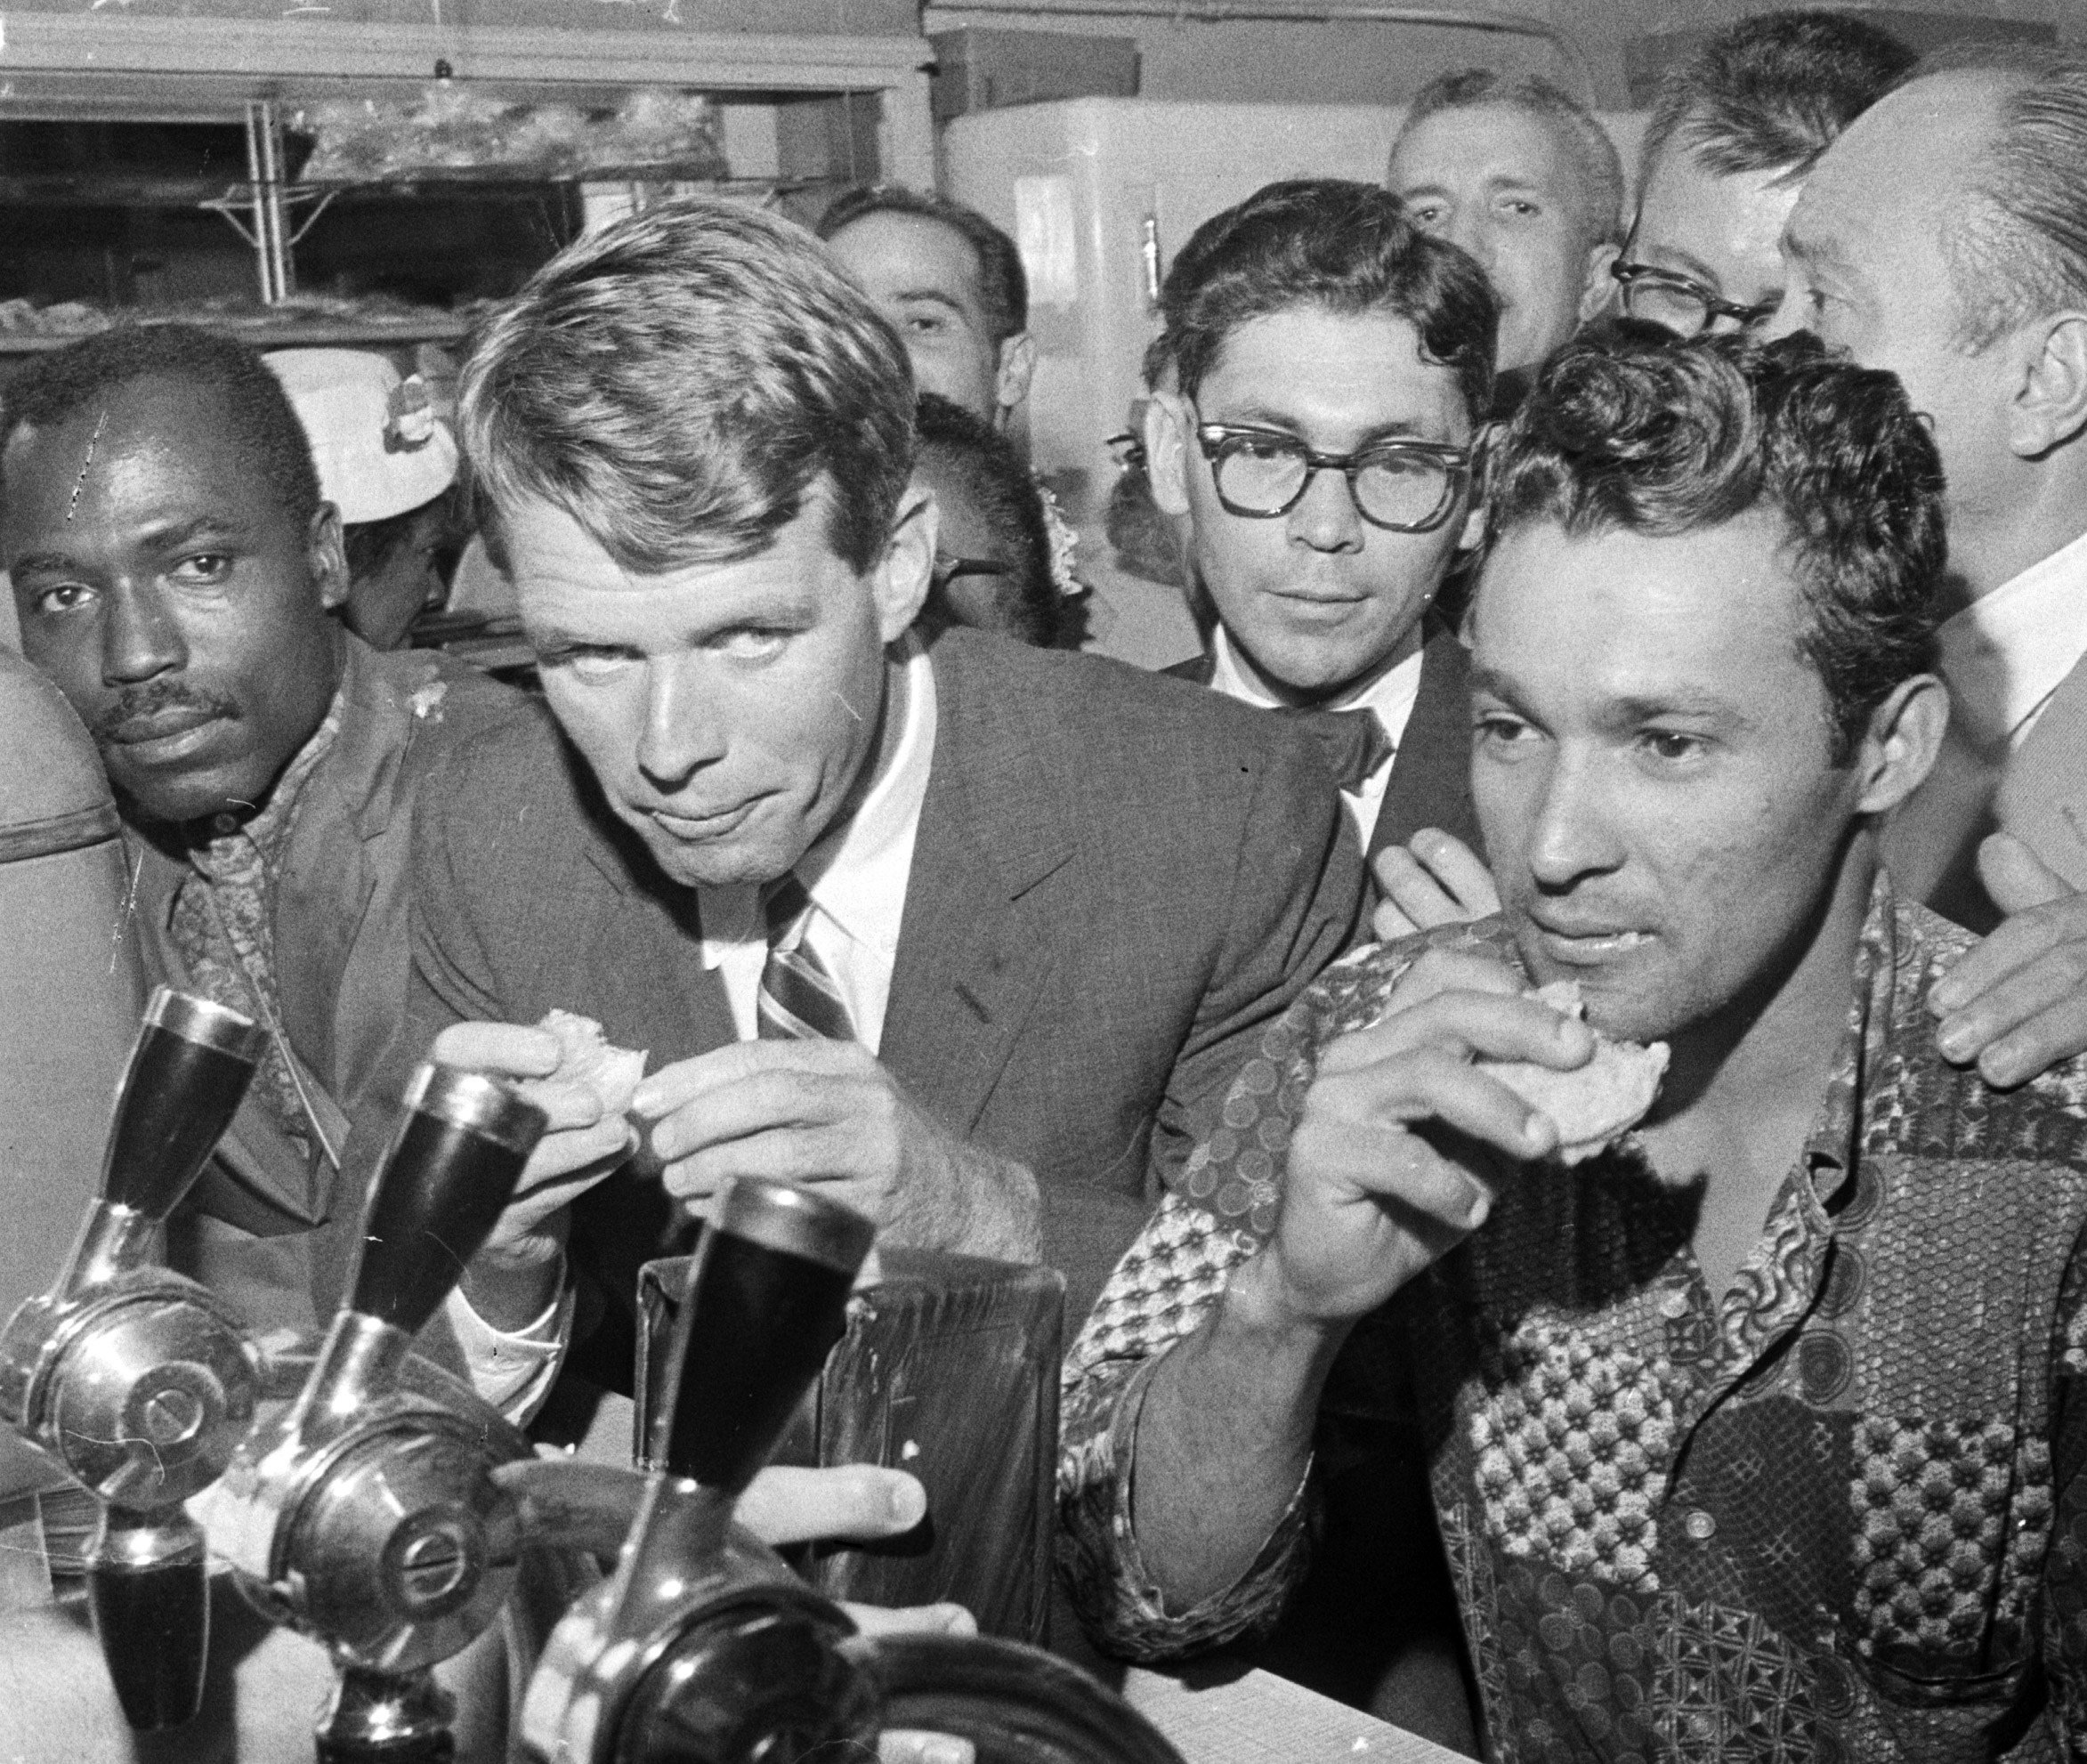 Robert Kennedy, managing his brother's presidential campaign, stops for a snack at a restaurant in Spanish Harlem. August 25, 1960.